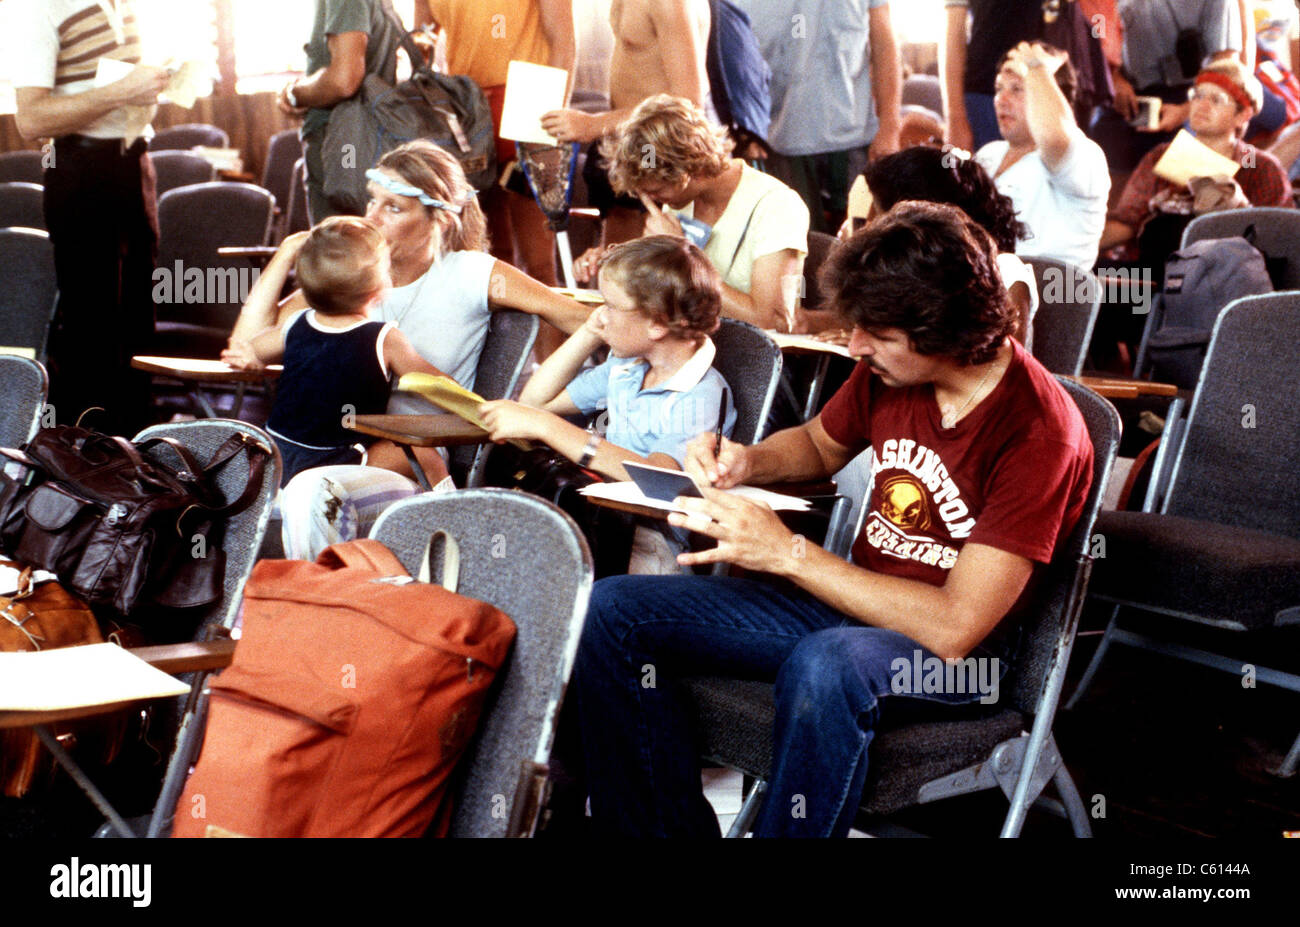 U.S. civilians awaiting evacuation from Grenada during the October 1983 U.S. invasion. American medical students were among approximately 800 U.S. citizens on Grenada. Nov 3 1983. (BSLOC 2011 3 26) Stock Photo